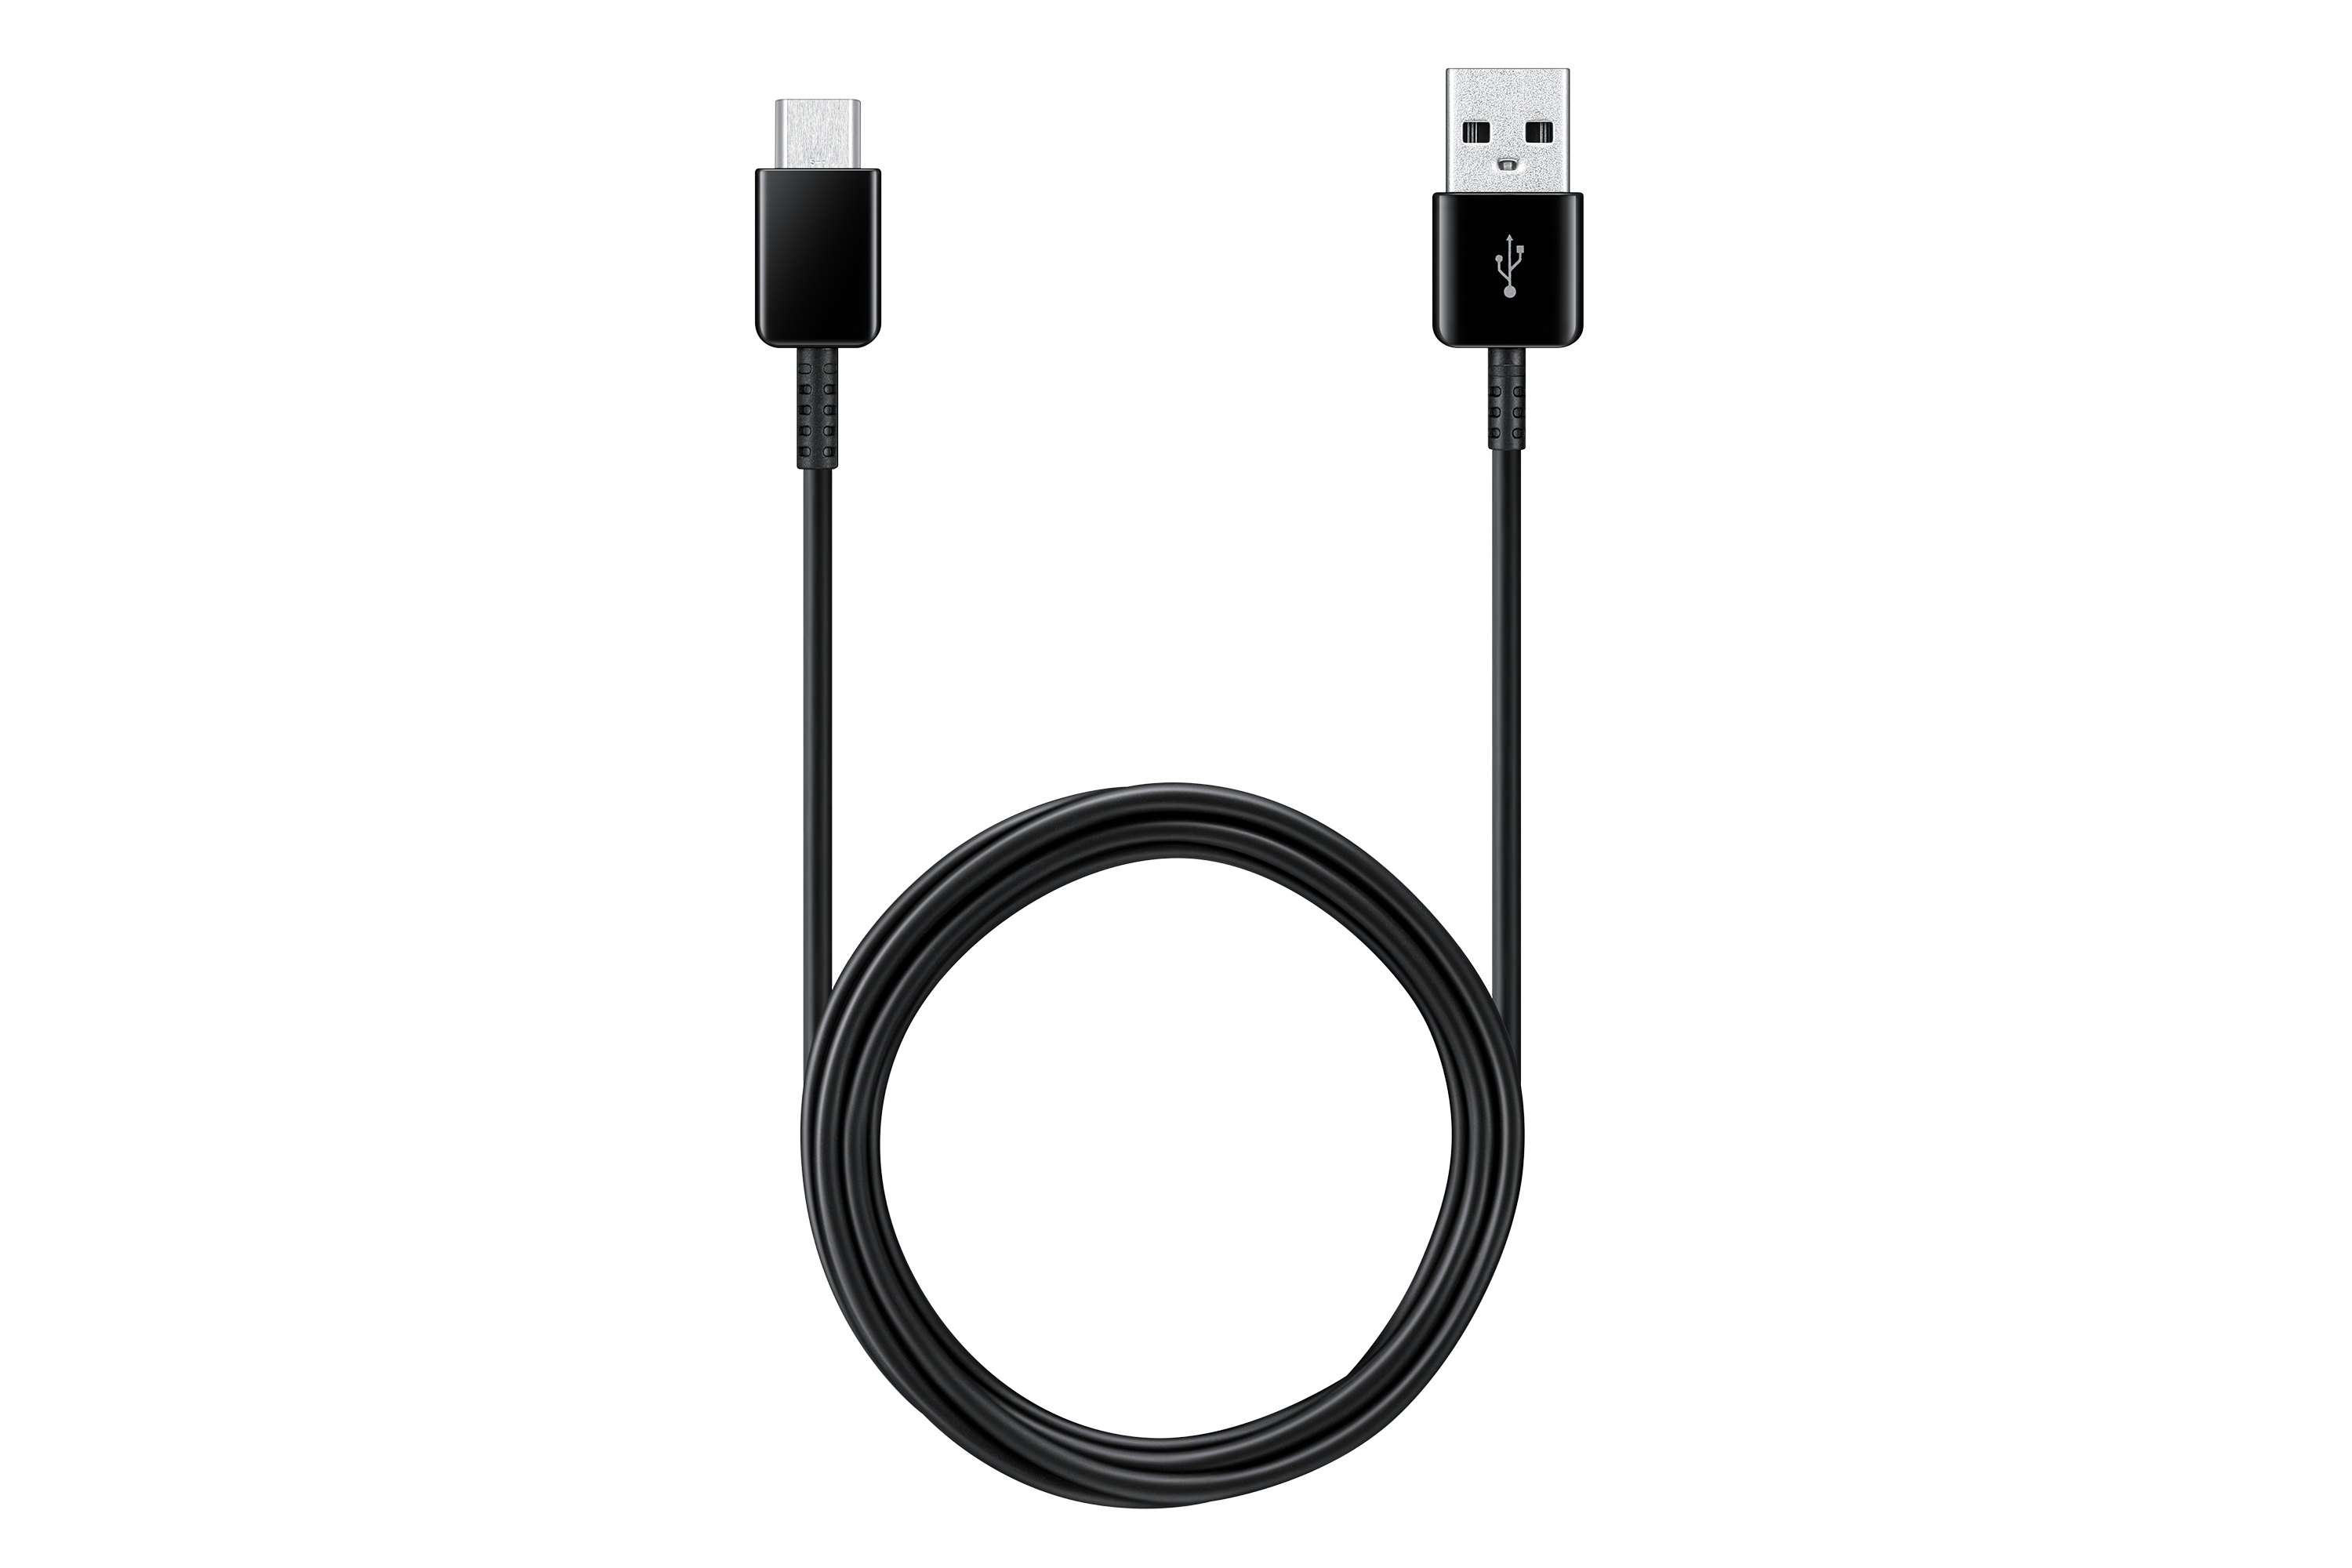 uk-cable-c-power-ep-dg930ibegww-frontblack-124867198.png